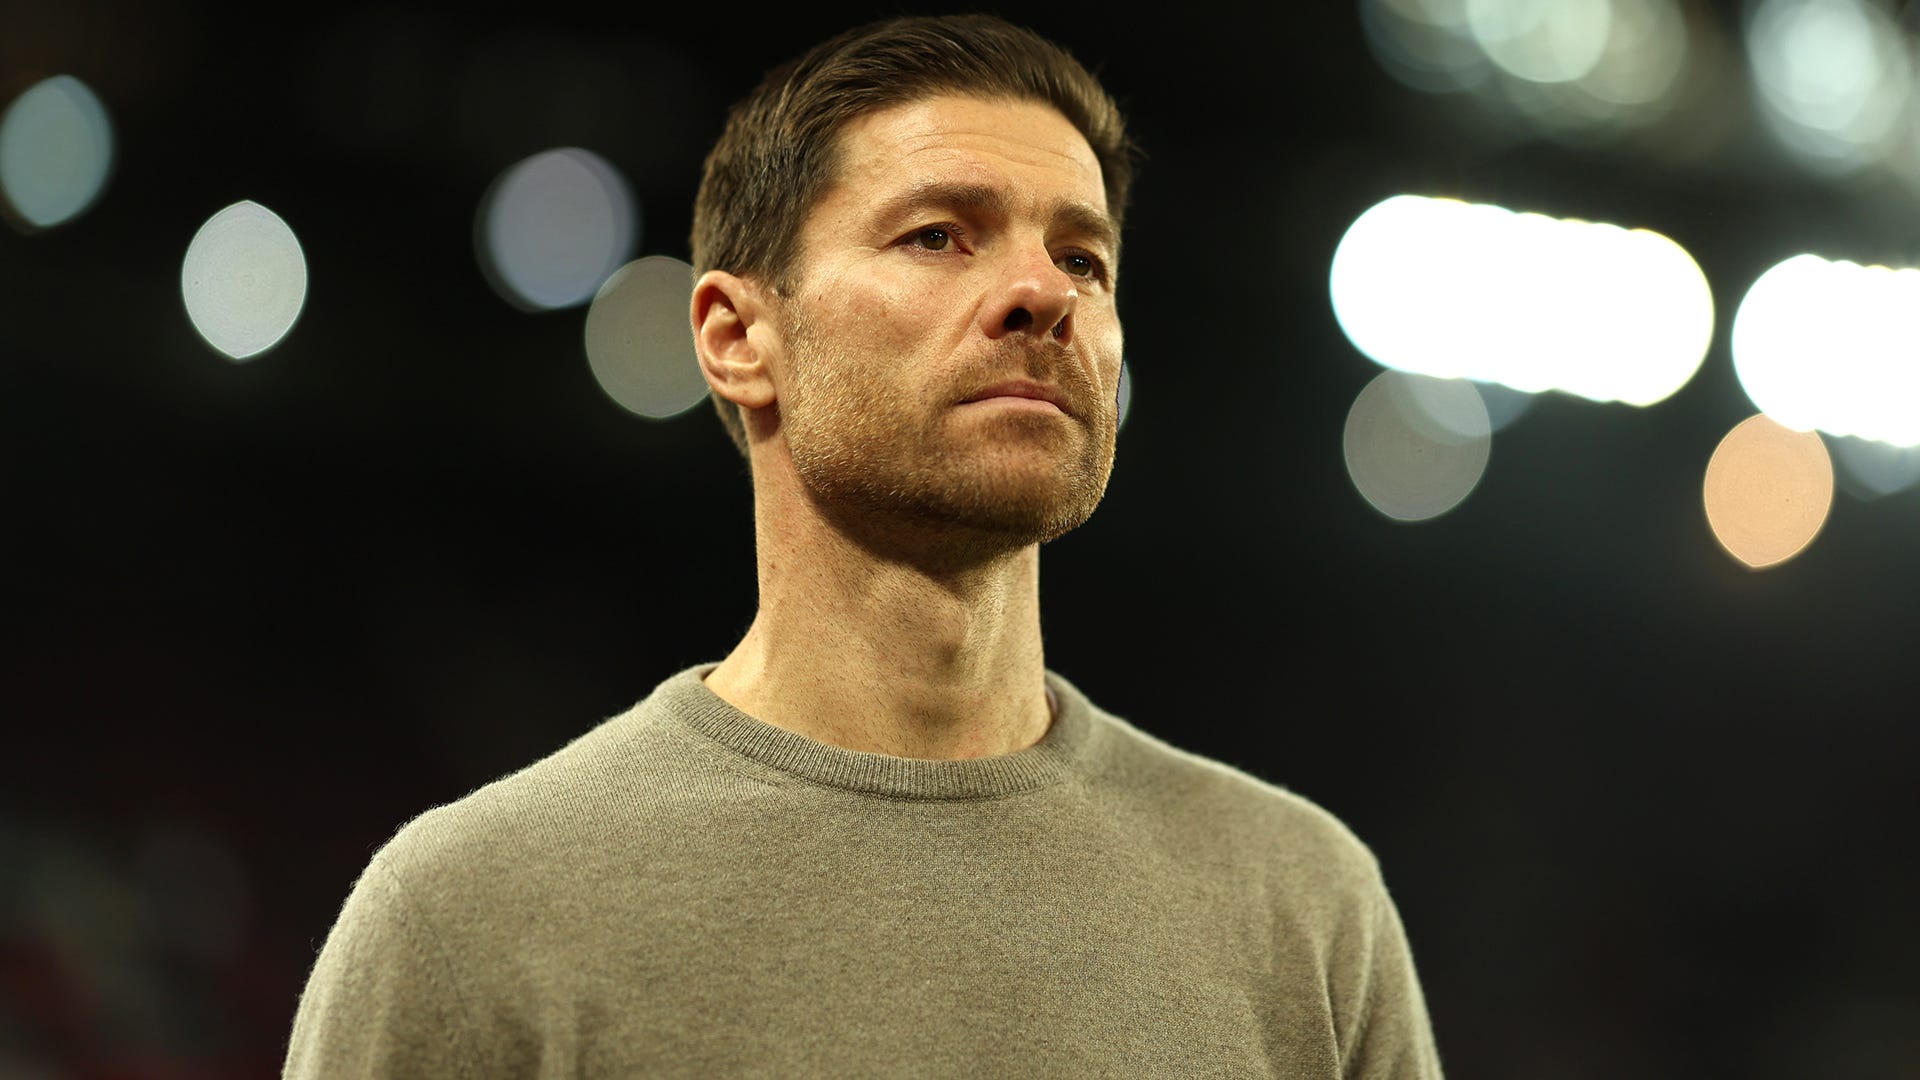 Future Liverpool manager? Xabi Alonso showing Reds fans why Bellingham's not the only Bundesliga story to follow